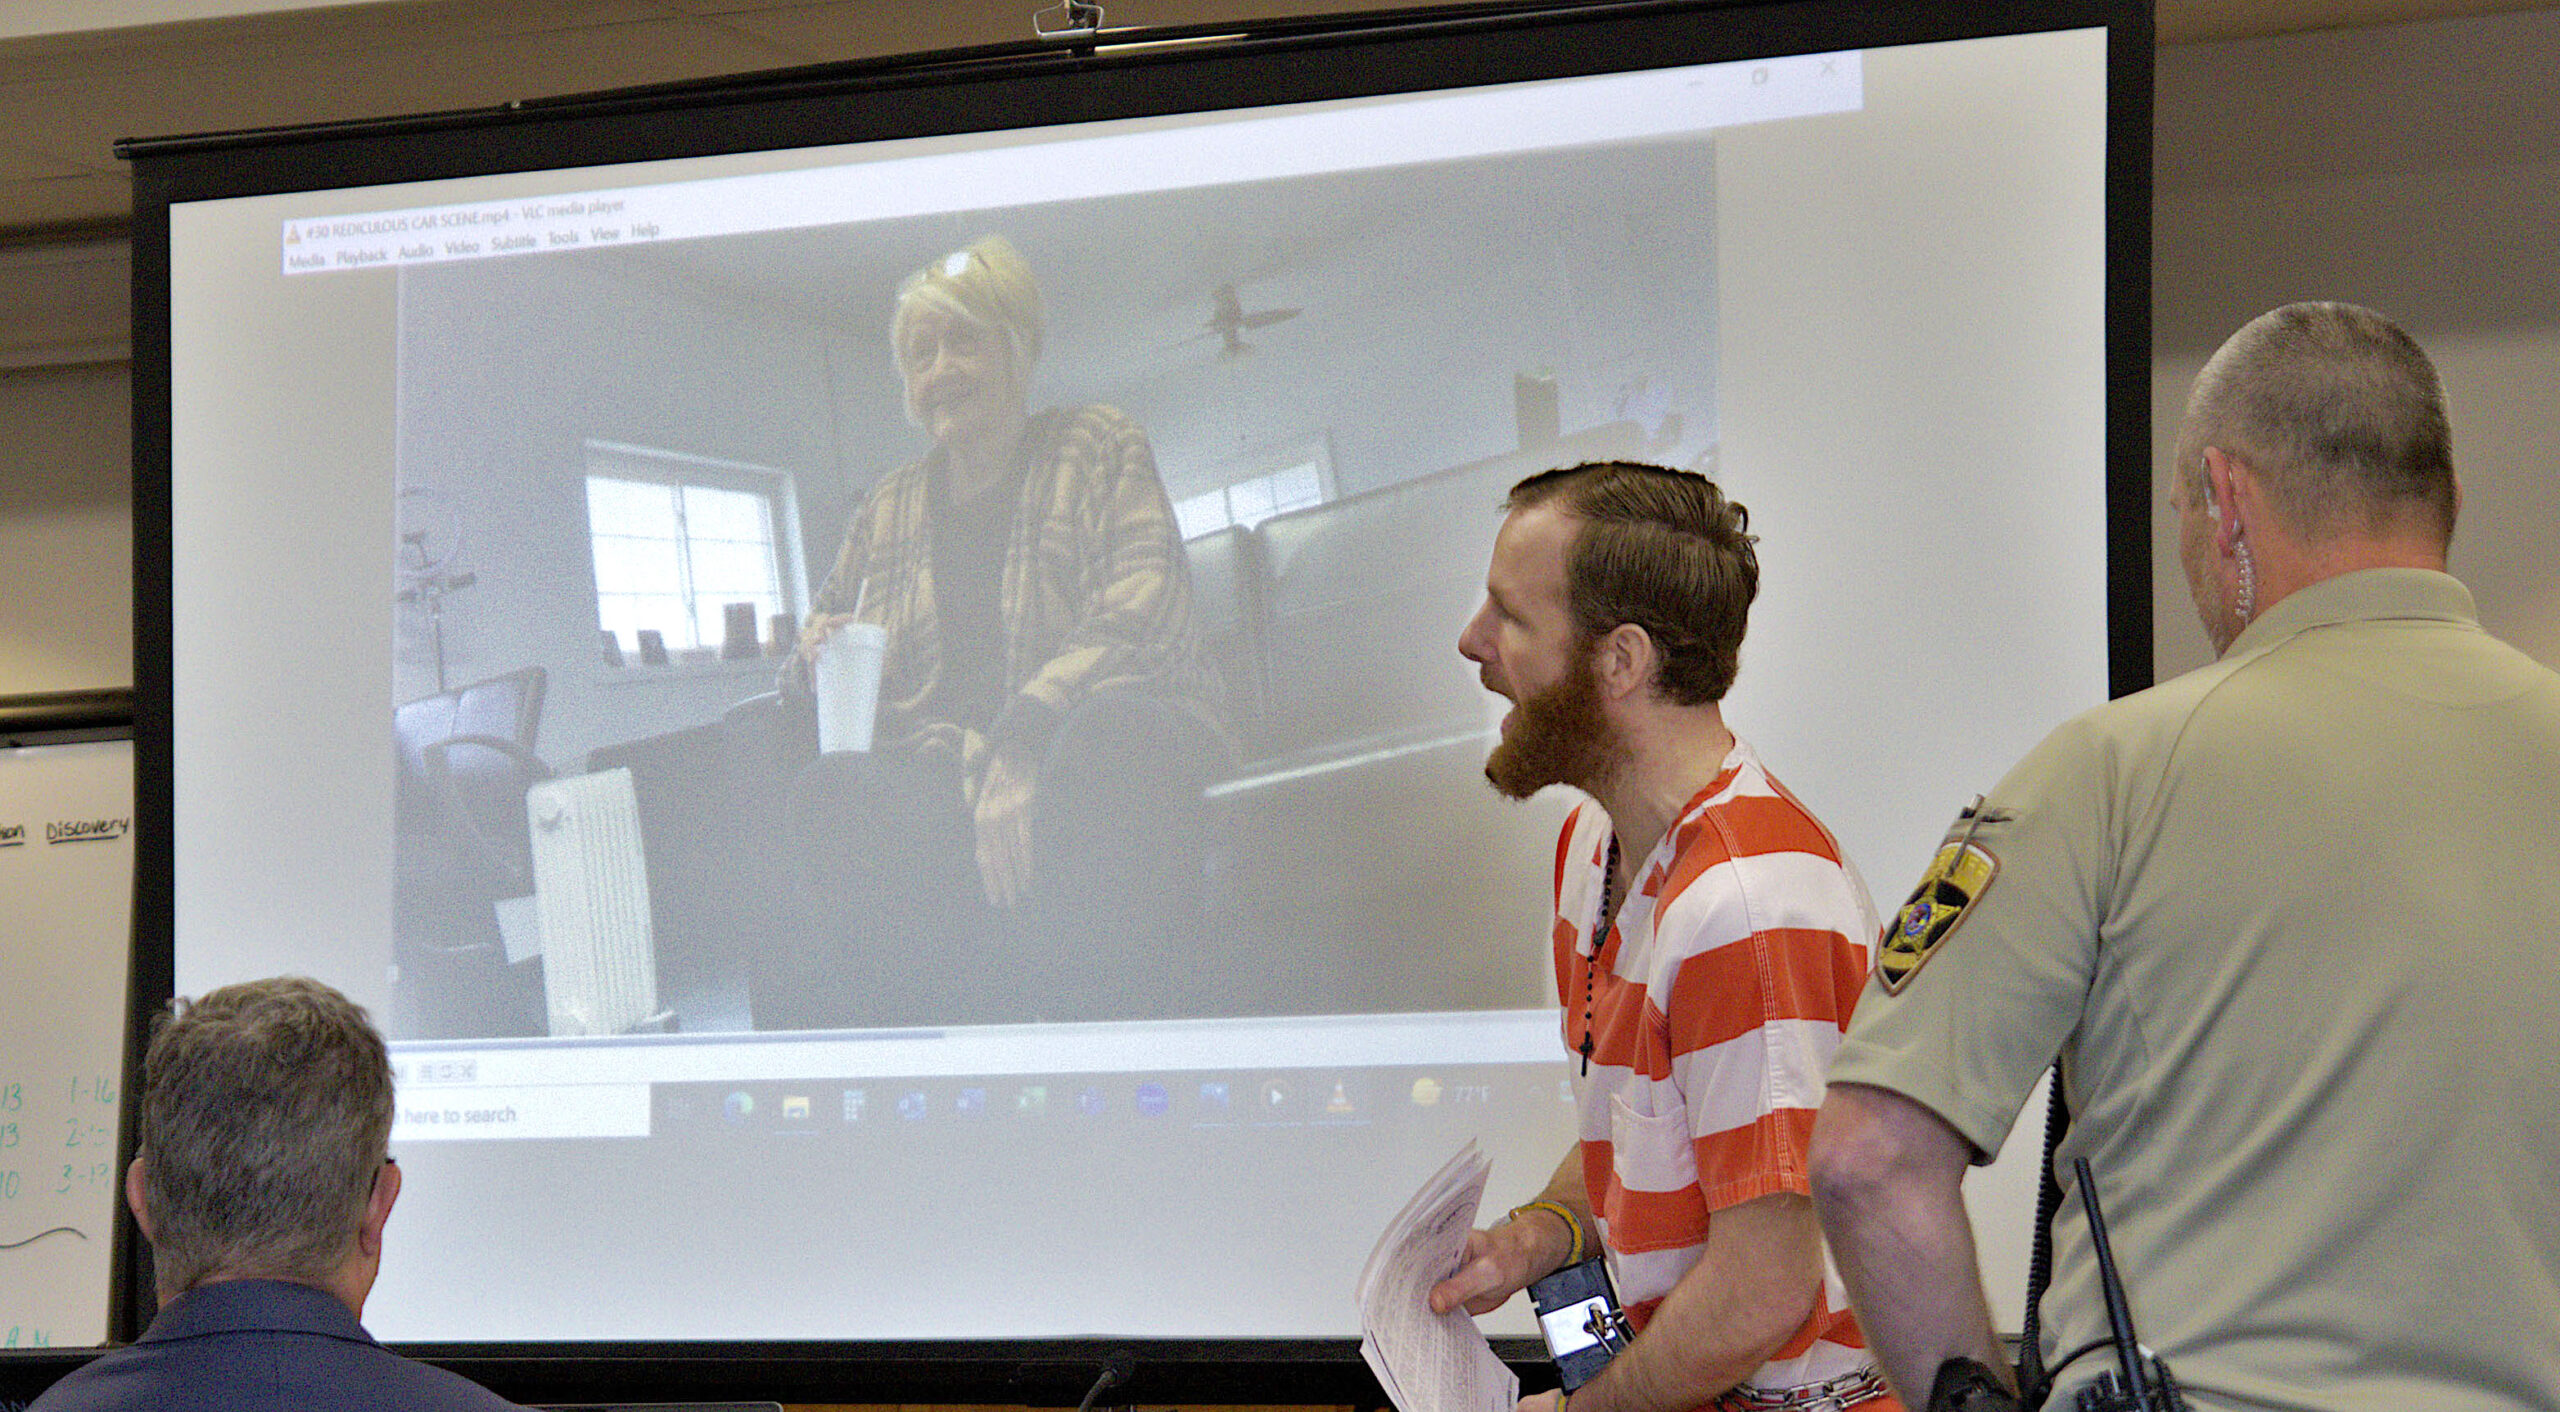 Using video and audio recordings made by Christina "Tina" Schmitt to law enforcement in Nov. 2021, Bradley Yohn attempted to demonstrate what he sees as evidence tampering against him. Yohn has been charged with kidnapping, vehicular hijacking, and criminal sexual assault, among others, in an alleged attack of Schmitt in 2021.